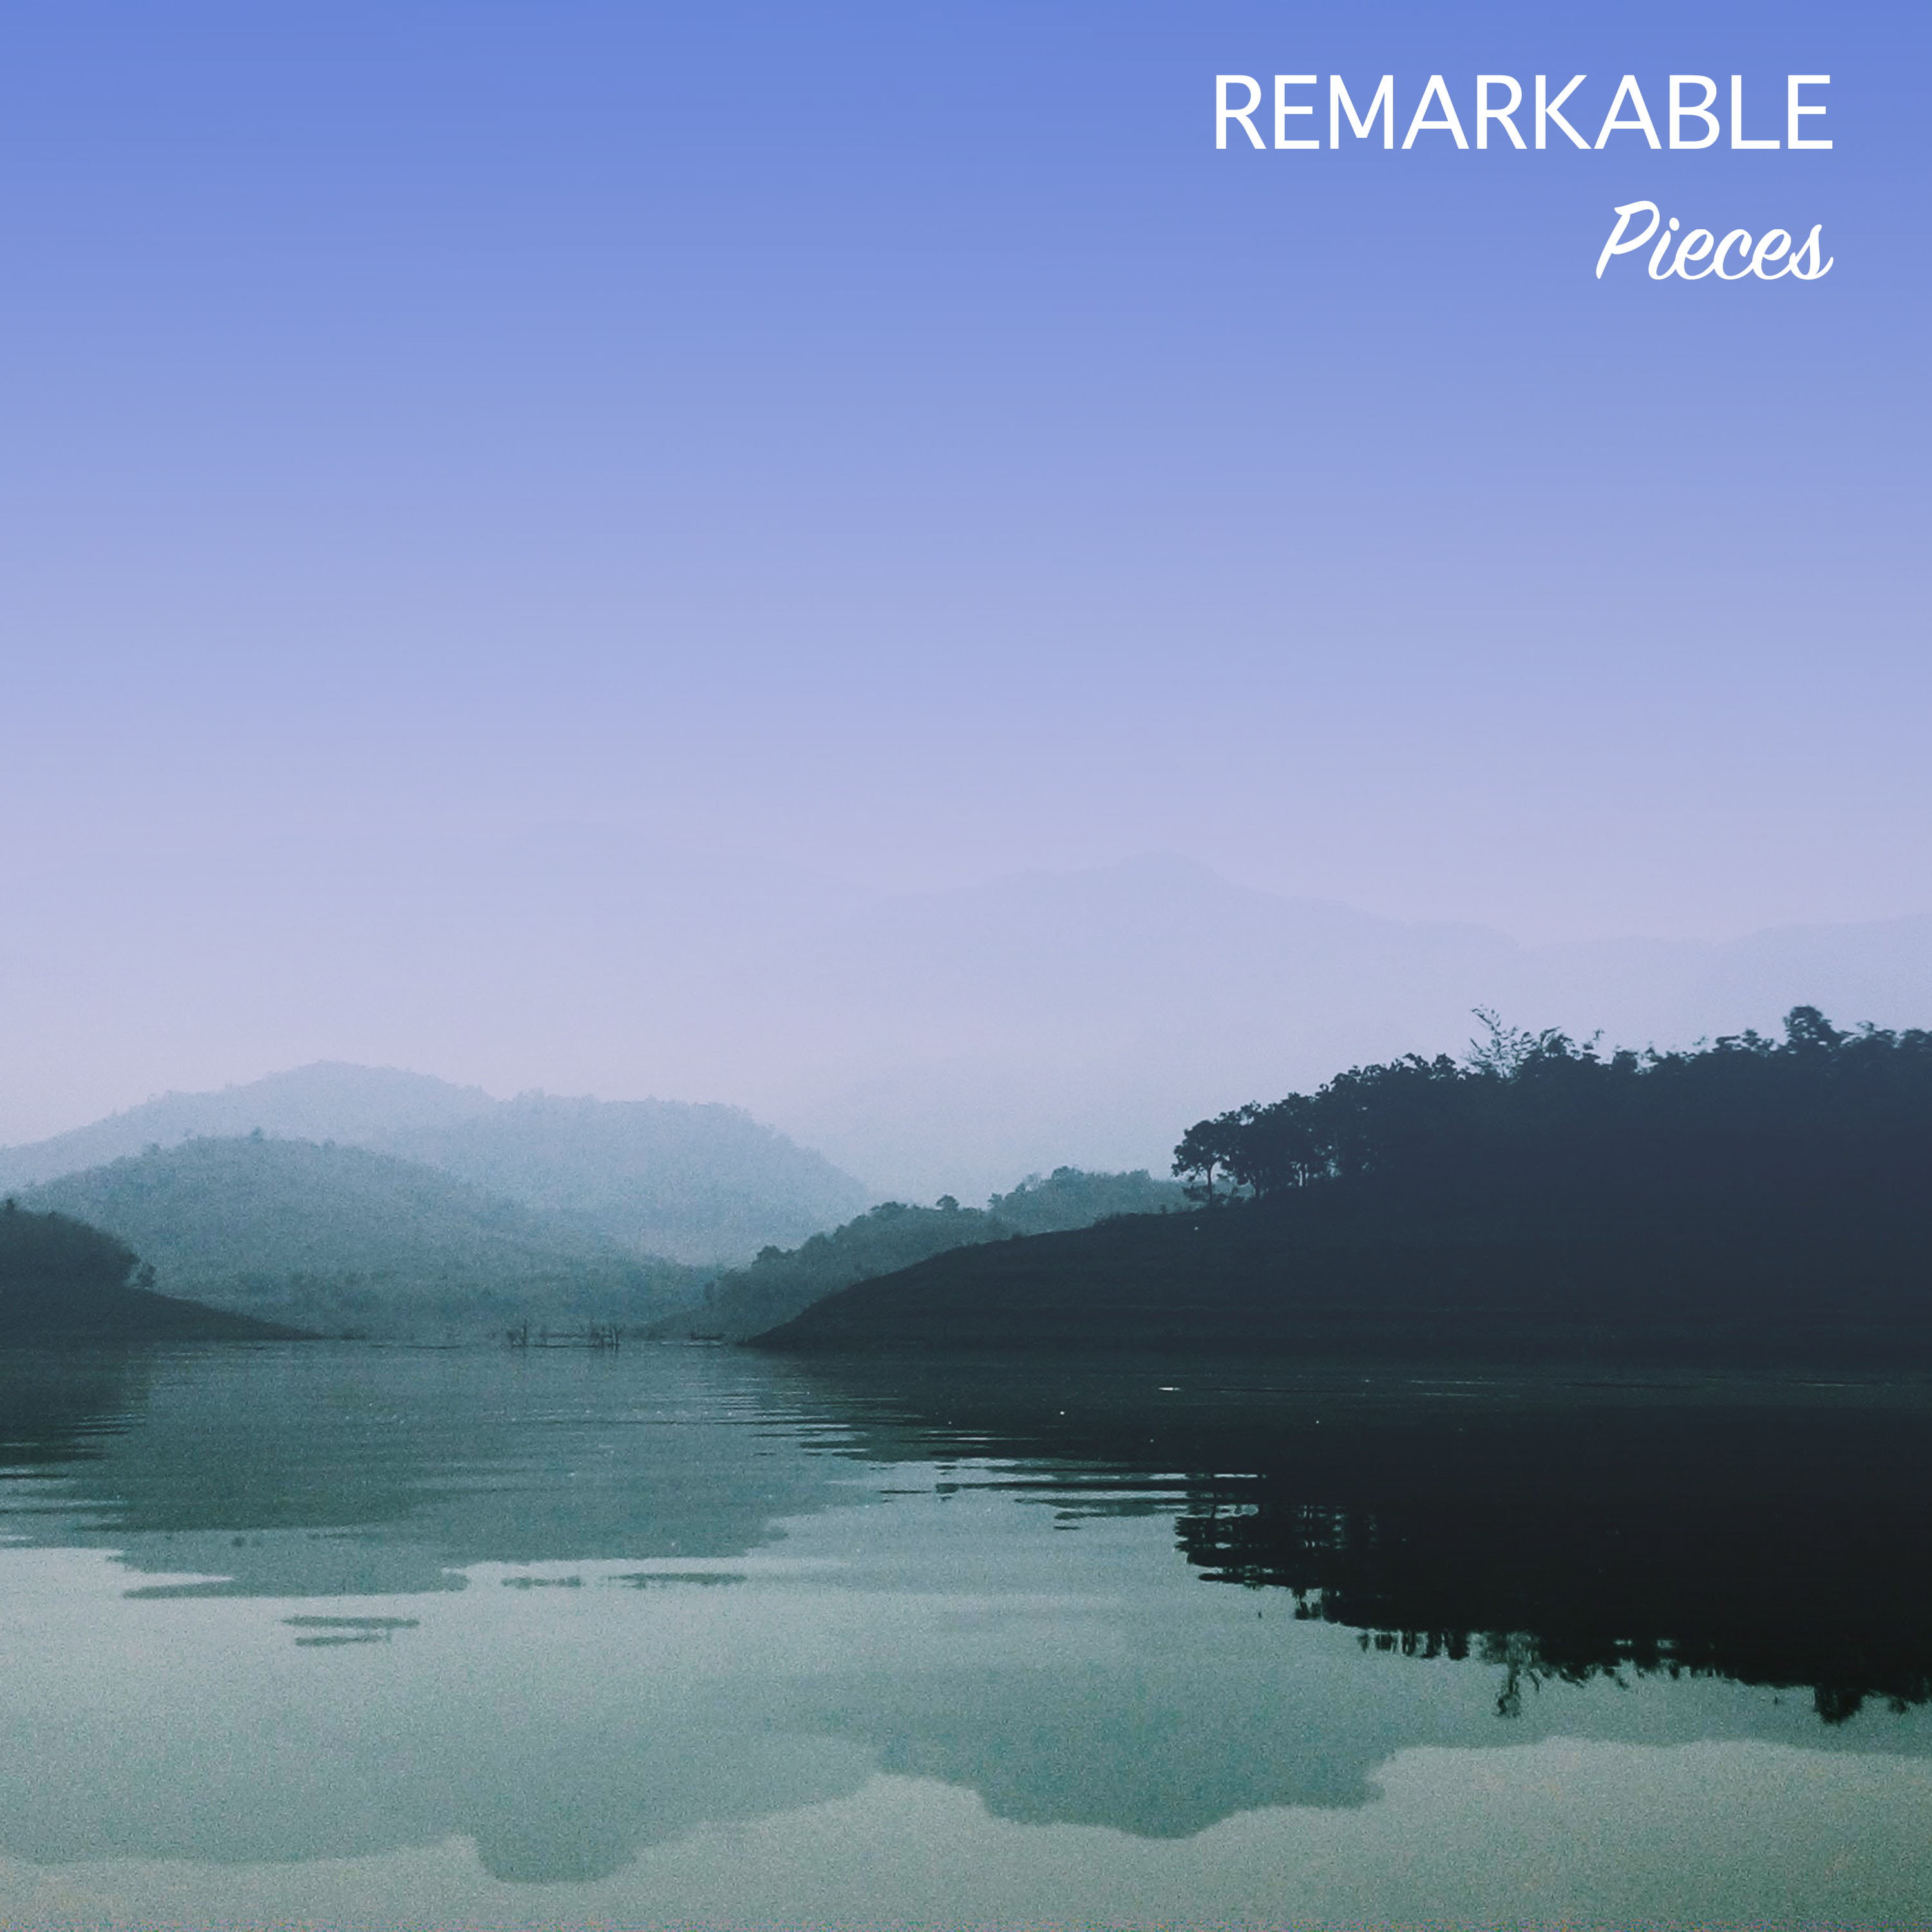 #12 Remarkable Pieces for Reiki & Relaxation